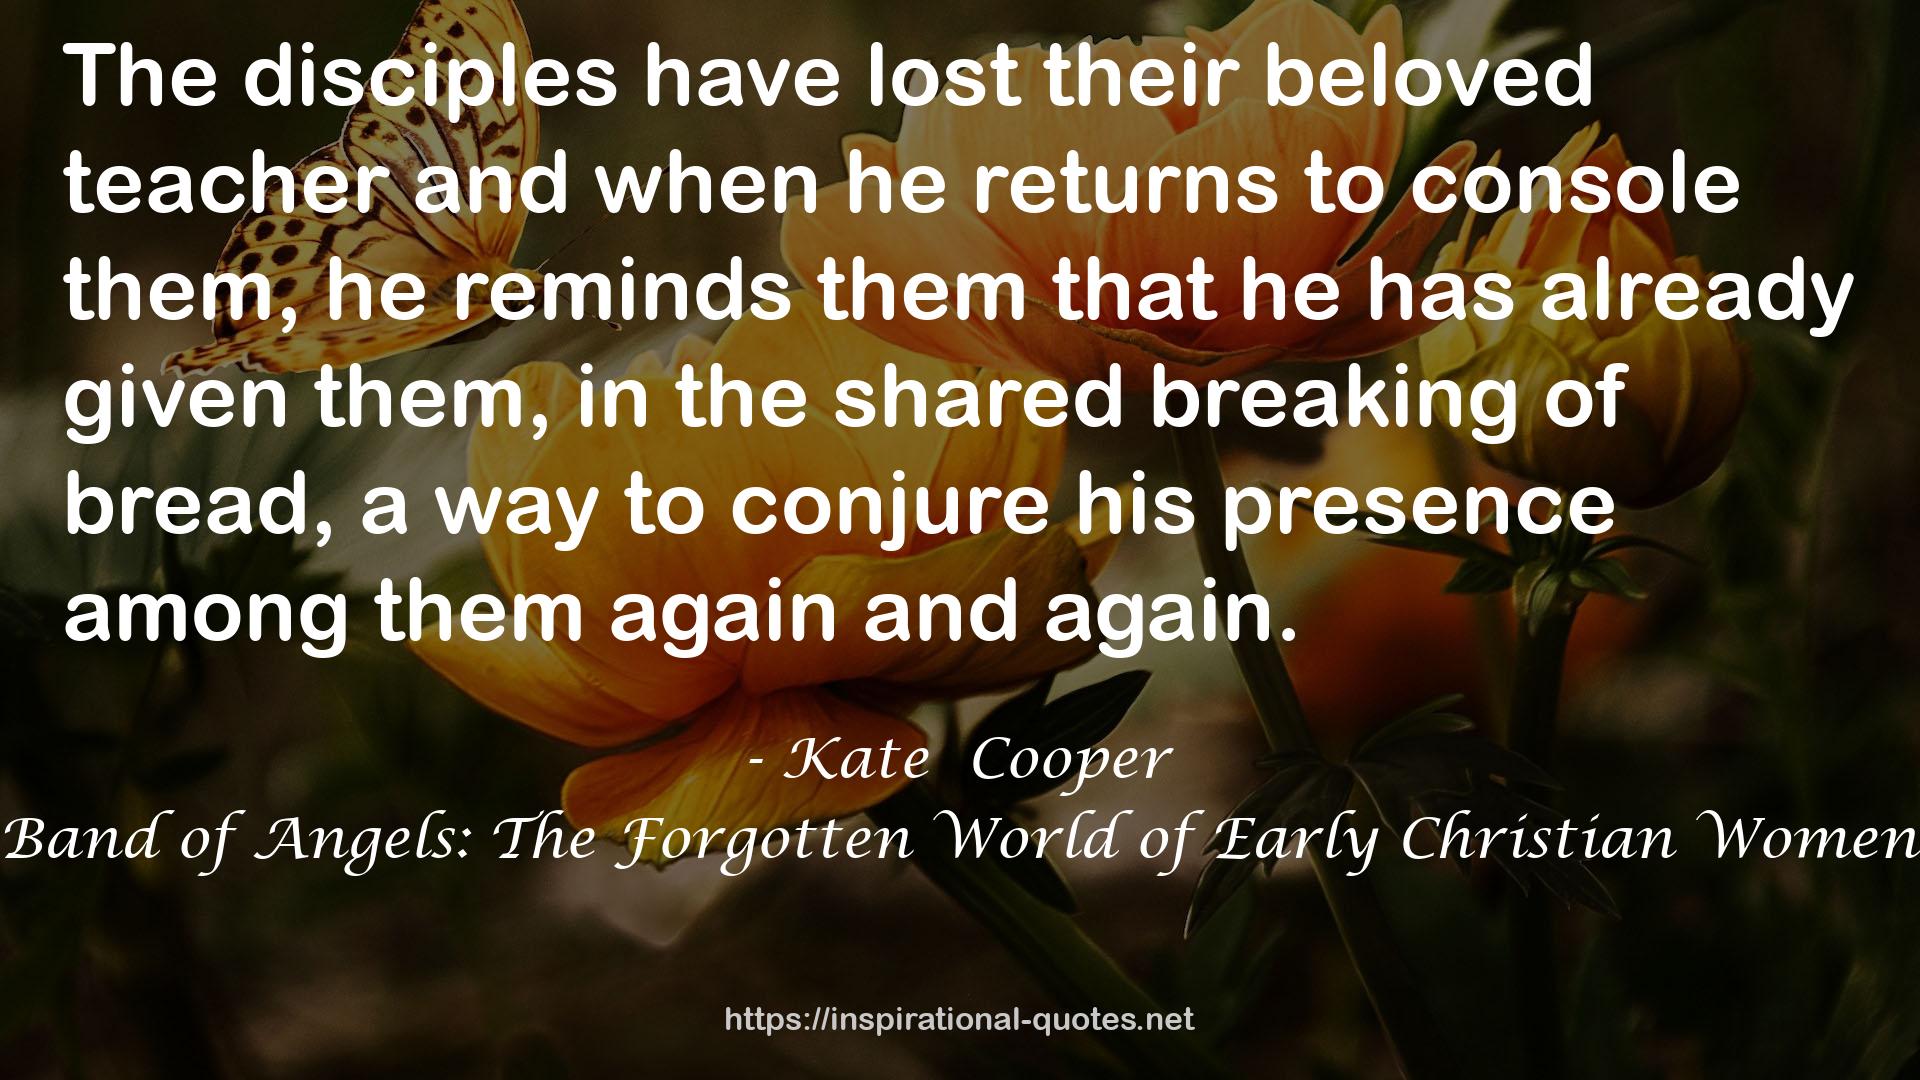 Band of Angels: The Forgotten World of Early Christian Women QUOTES